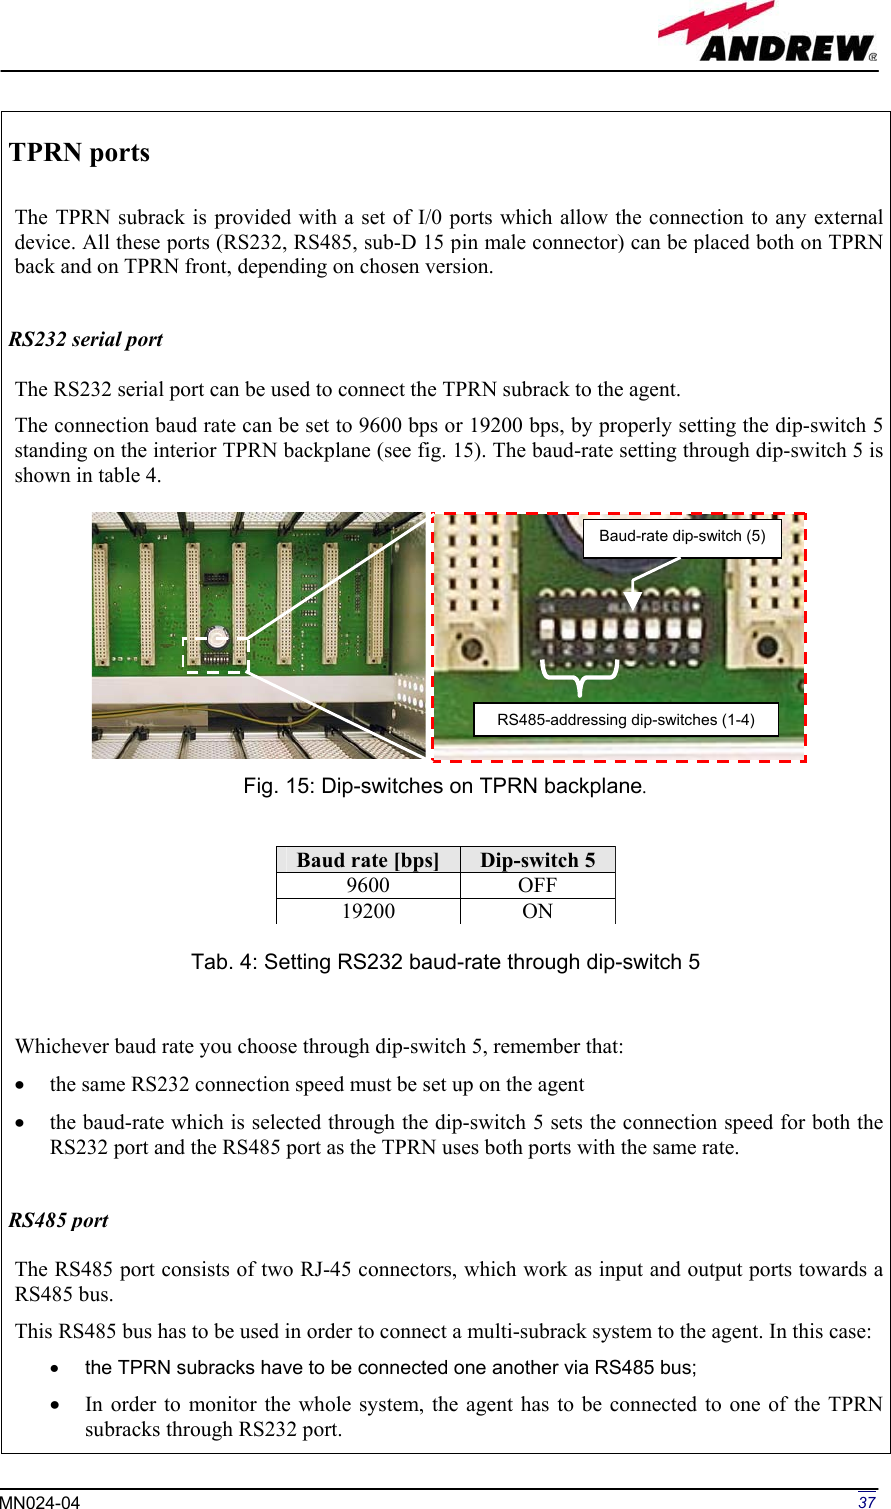 Page 37 of Andrew Wireless Innovations Group BCP-TFAM23 Model TFAM23 Downlink Booster User Manual MN024 04 rev3